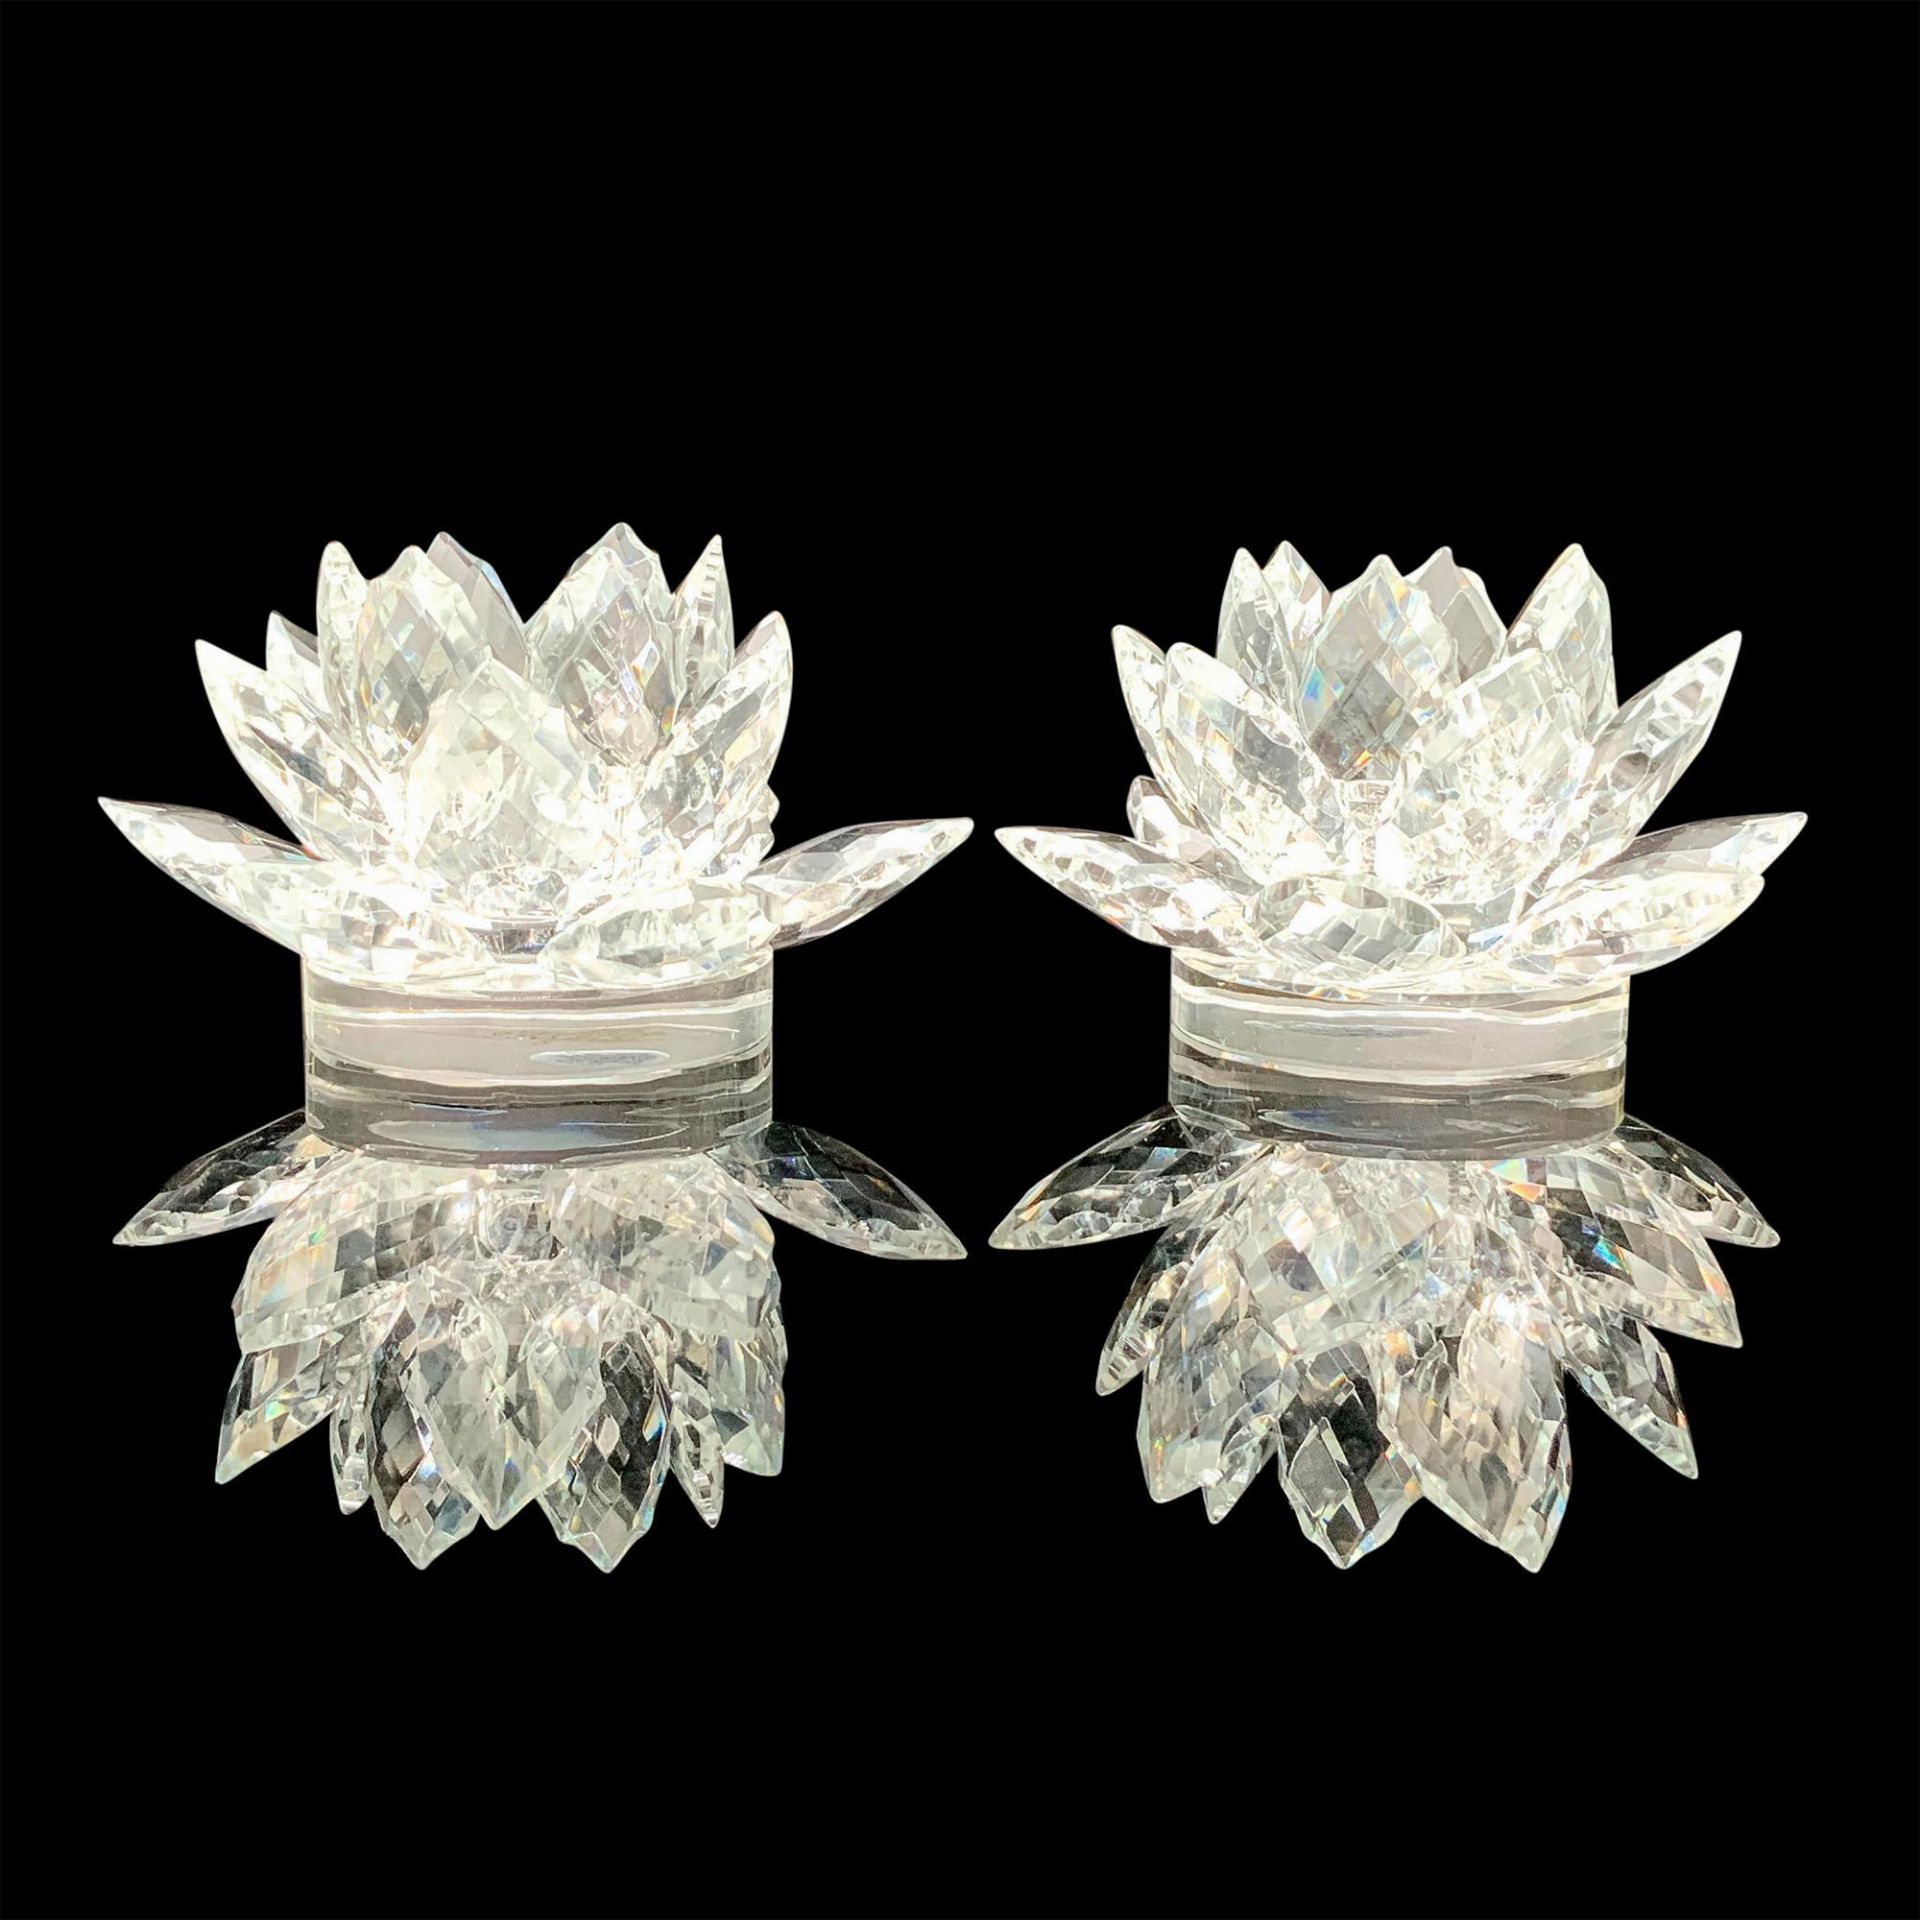 2pc Shannon Crystal Flower Candleholders